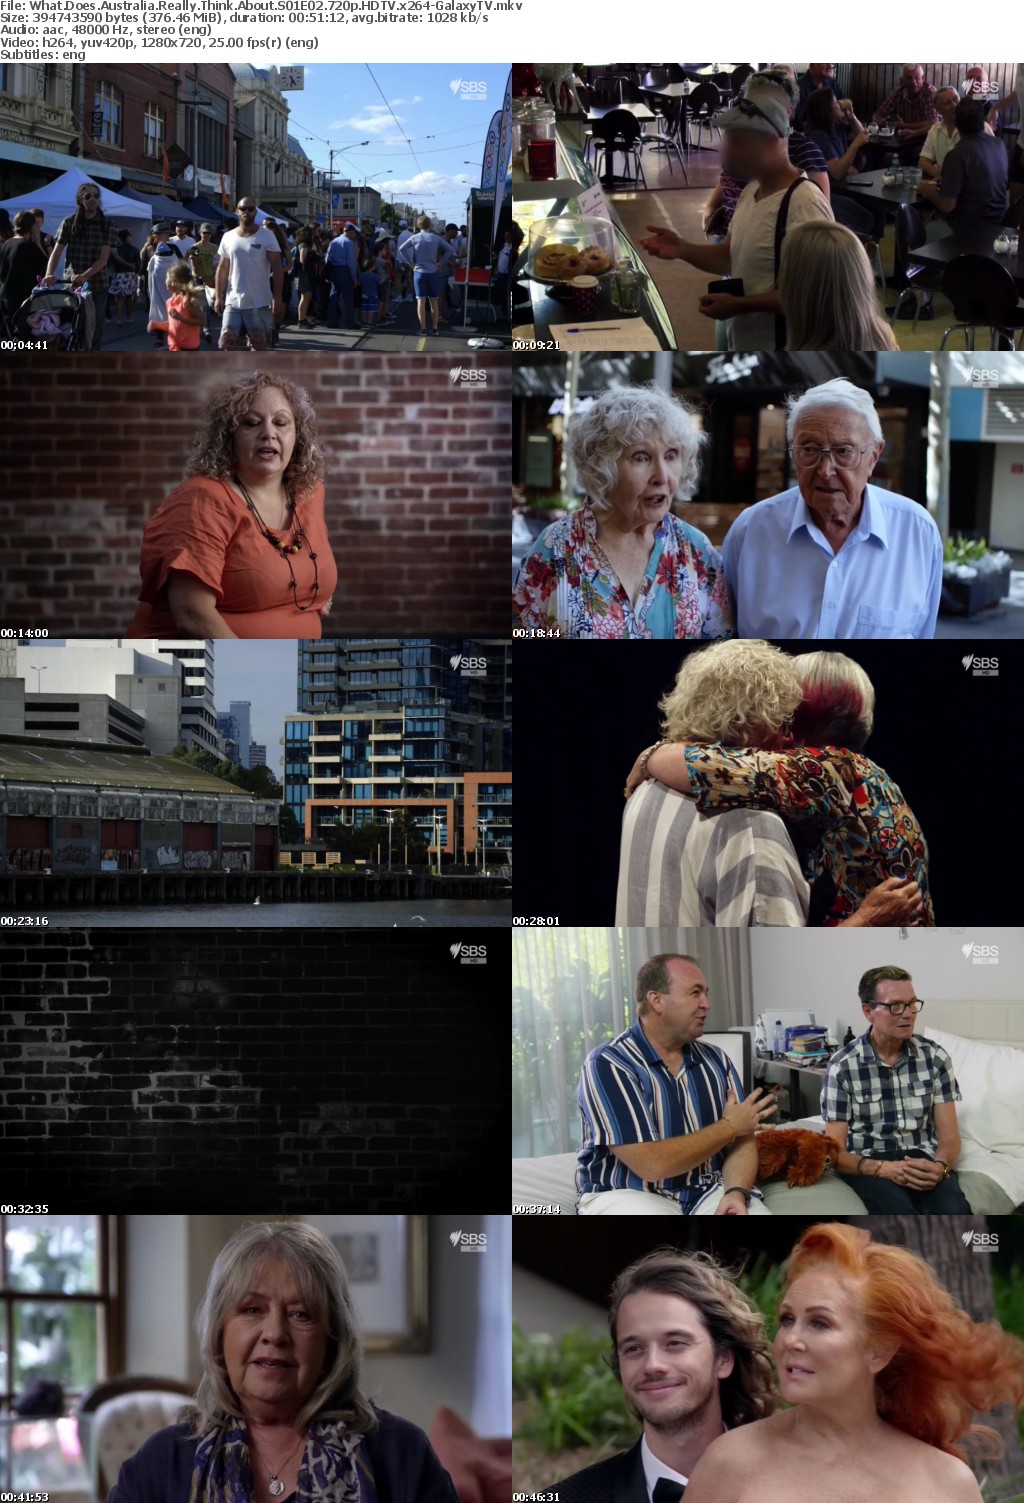 What Does Australia Really Think About S01 COMPLETE 720p HDTV x264-GalaxyTV